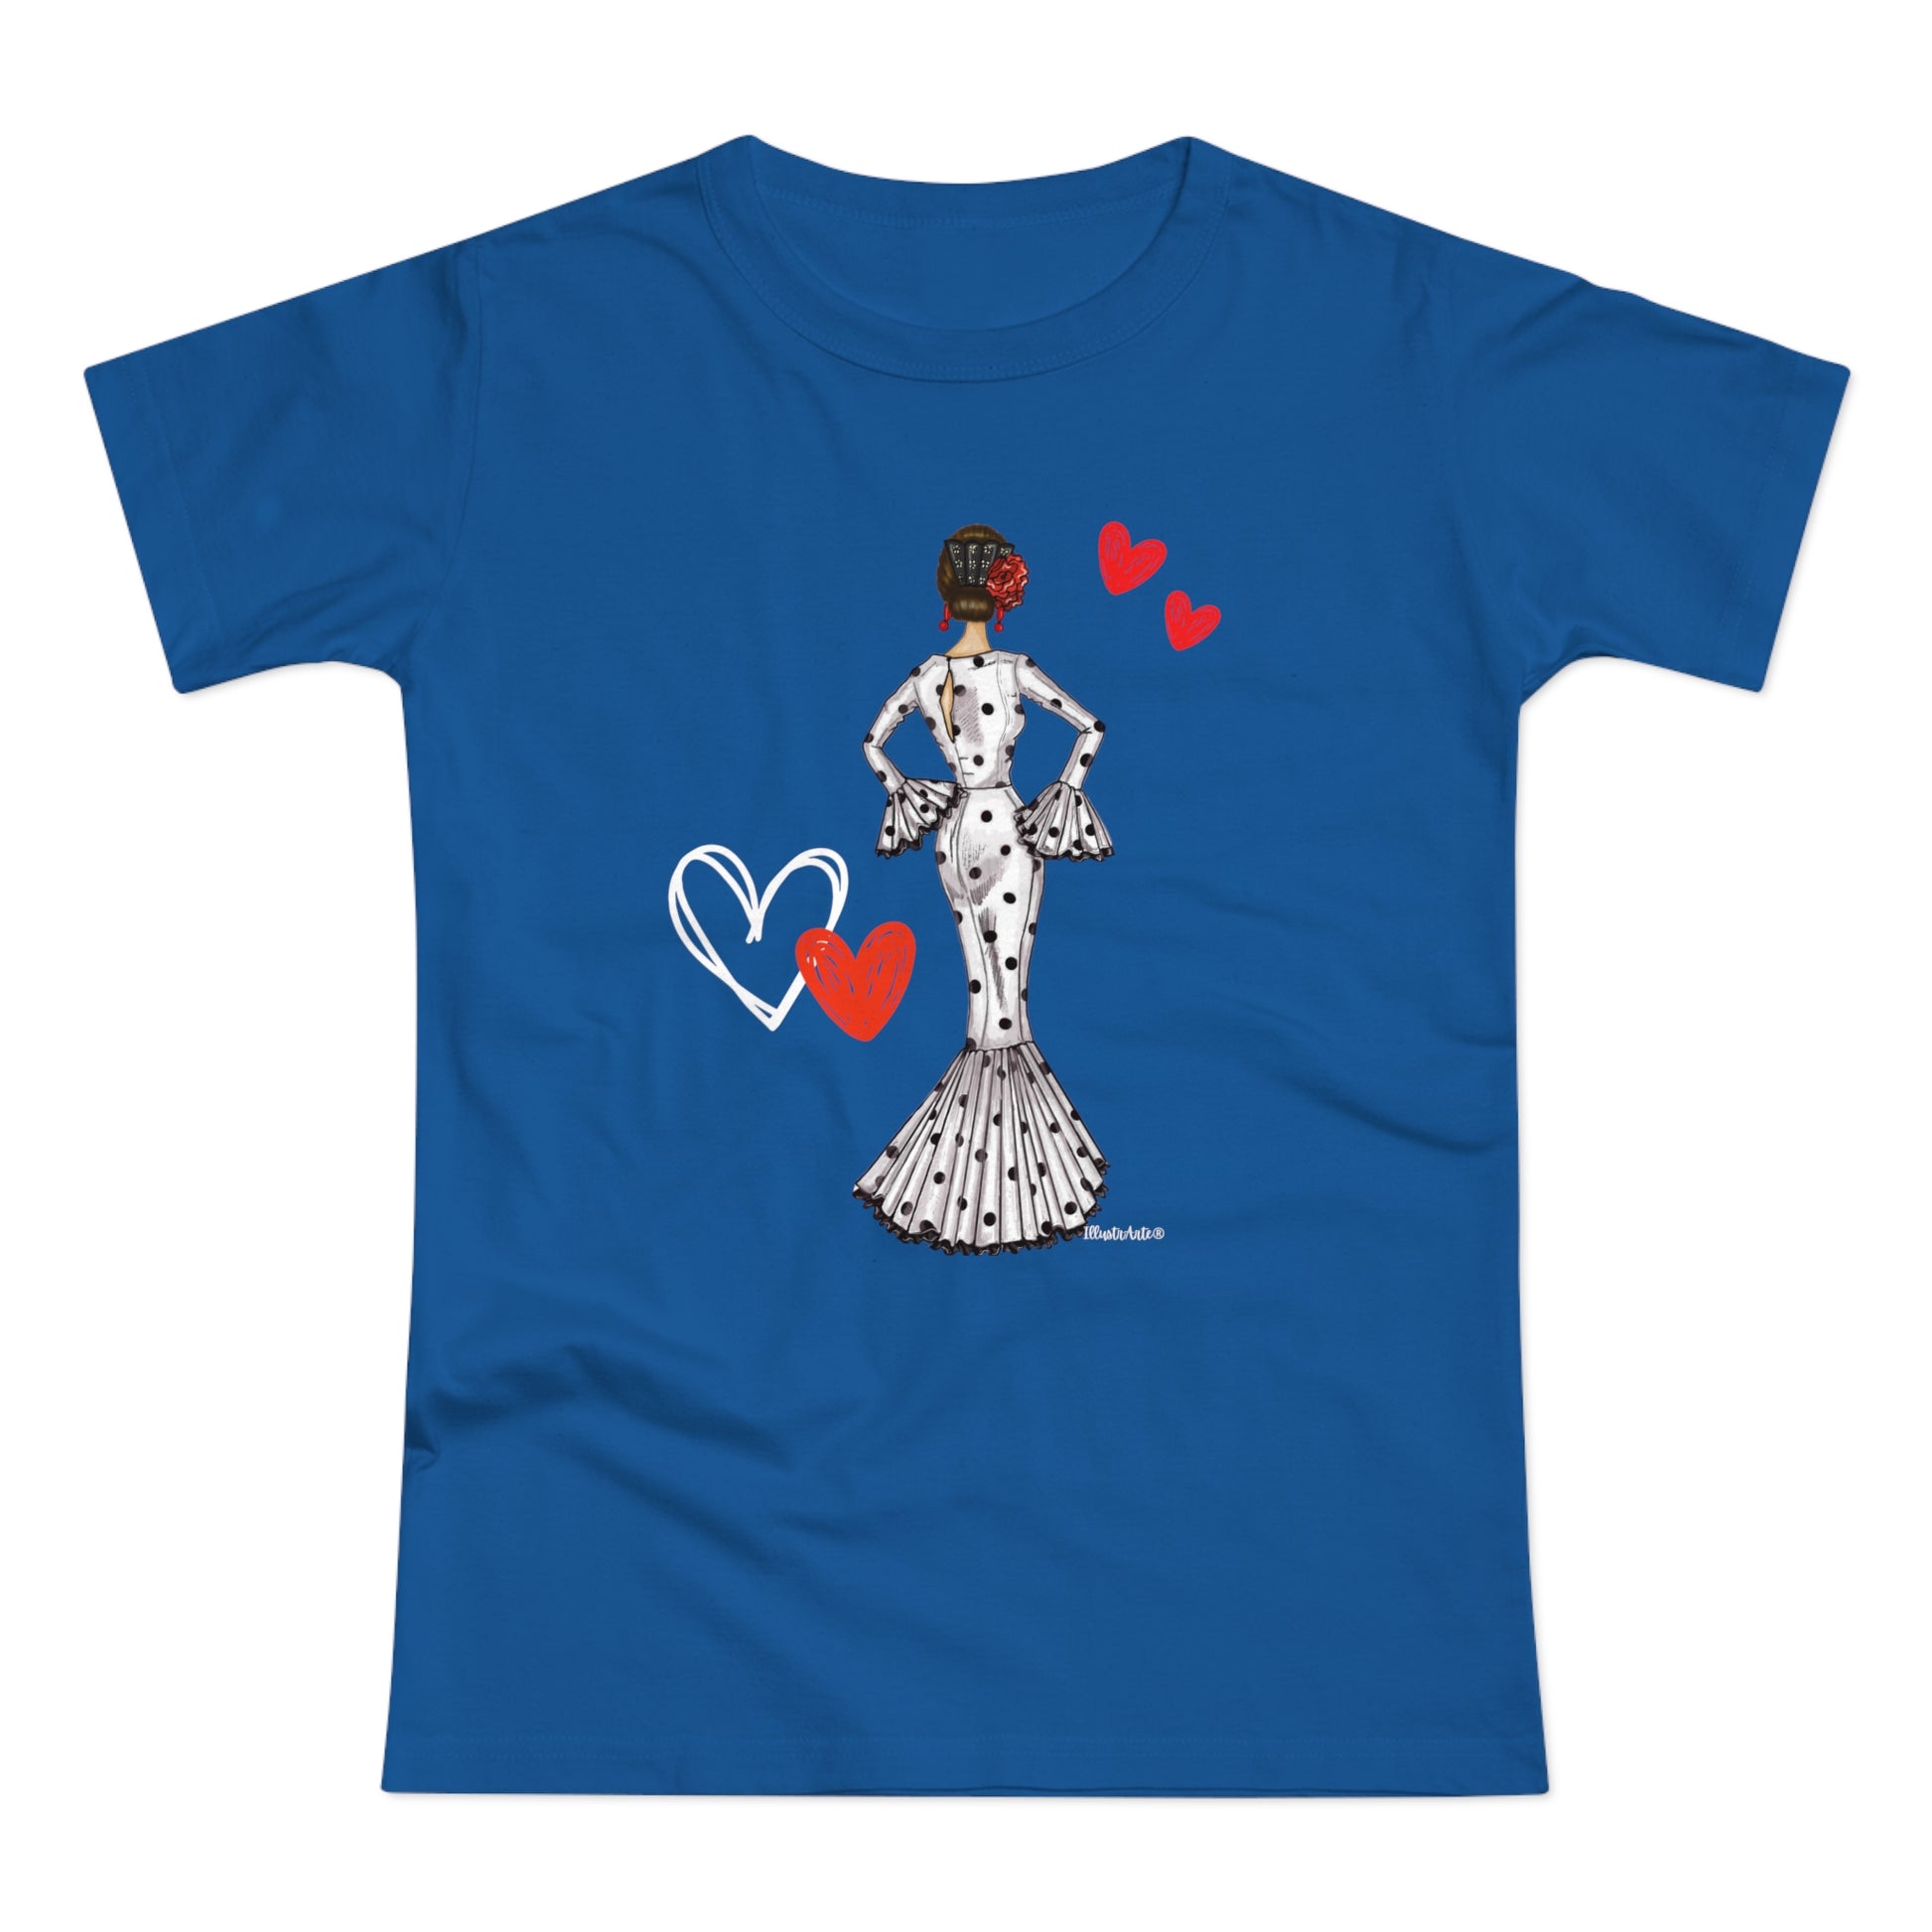 a blue t - shirt with a woman in a polka dot dress holding a heart